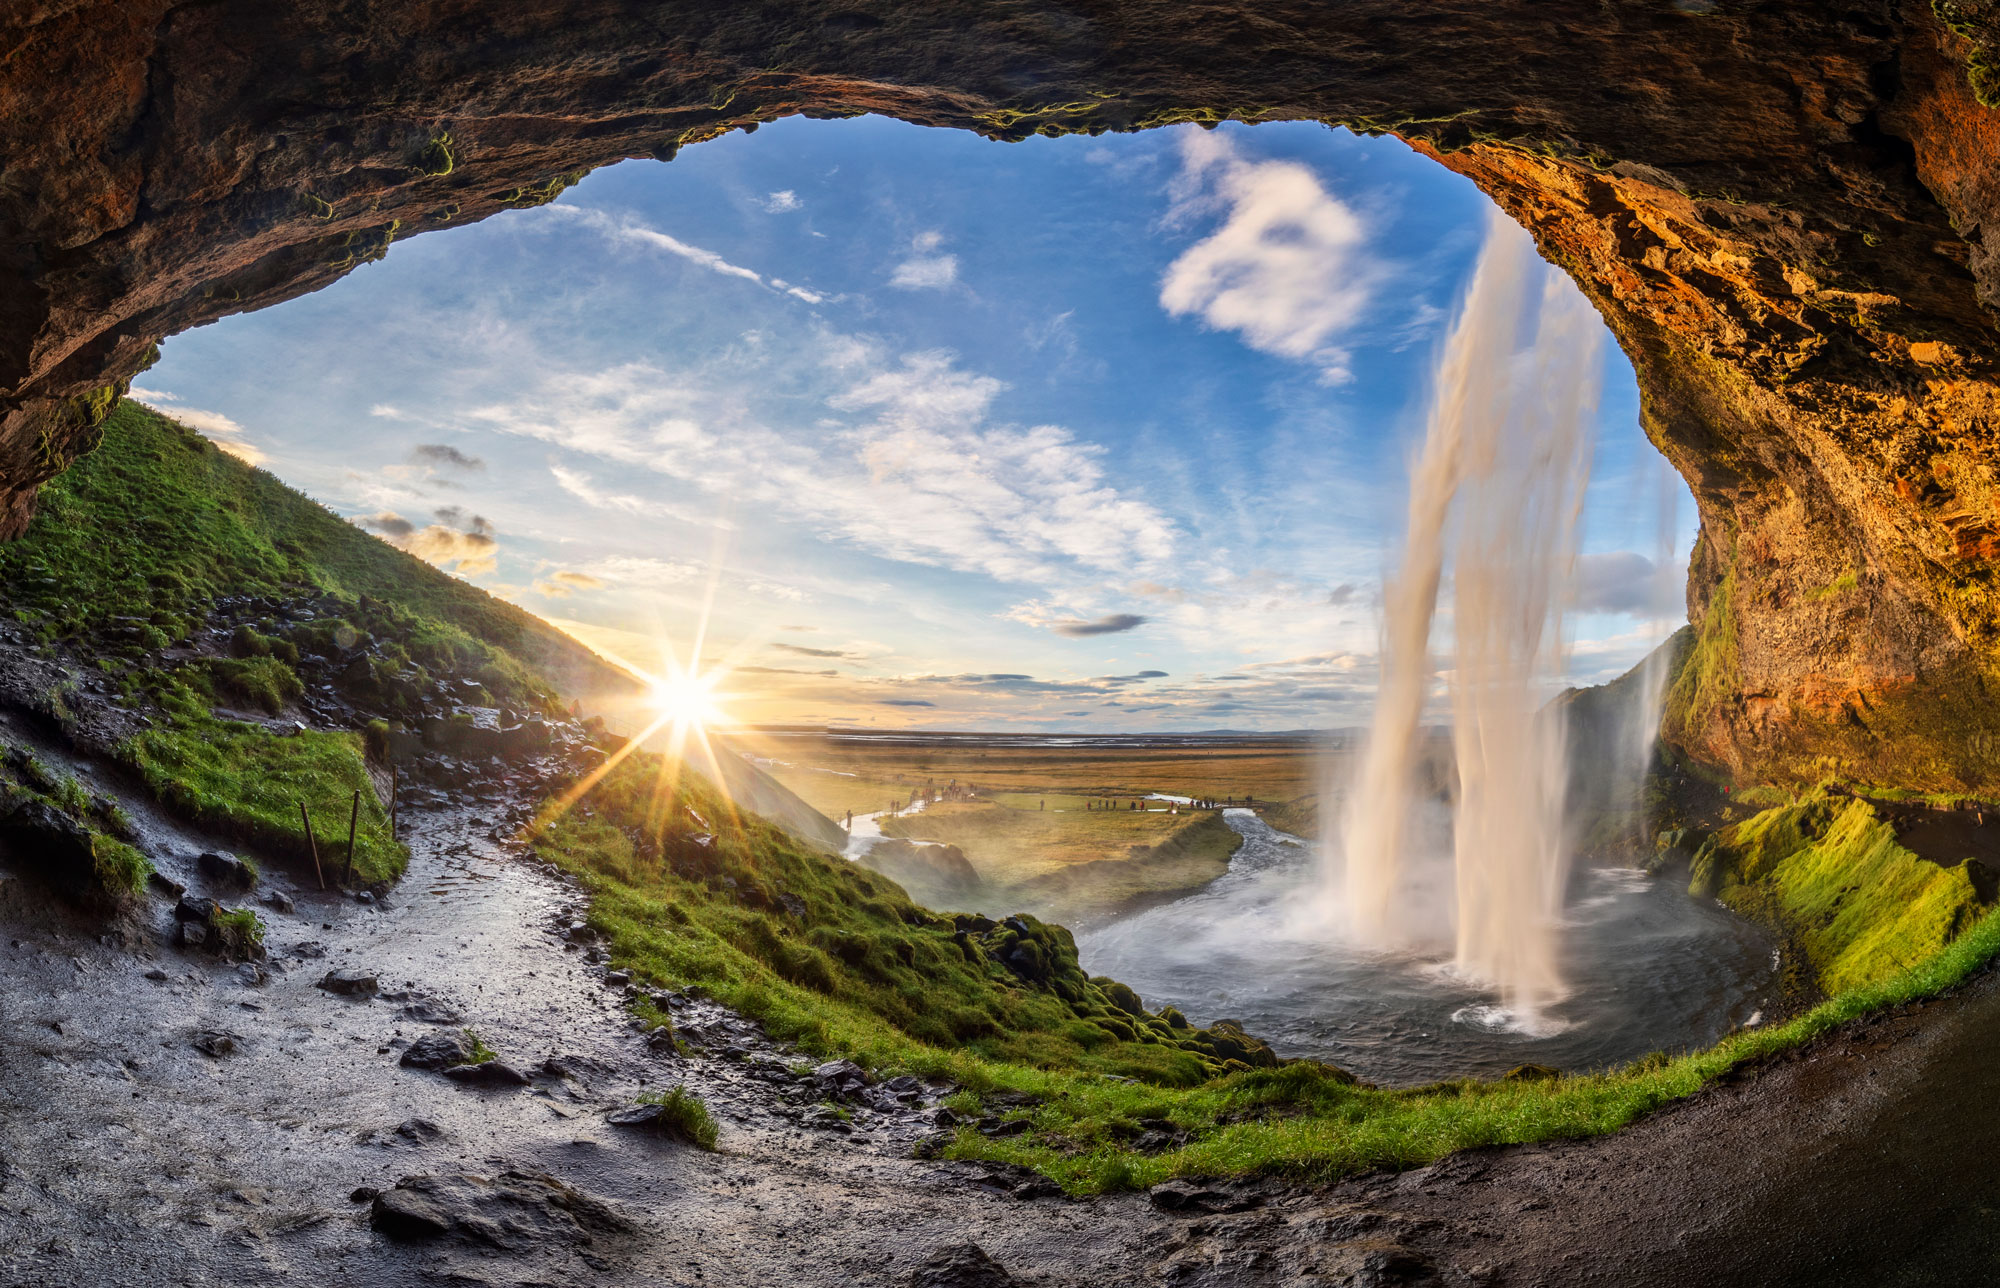 Seljalandfoss waterfall in summer time at sunset, Iceland